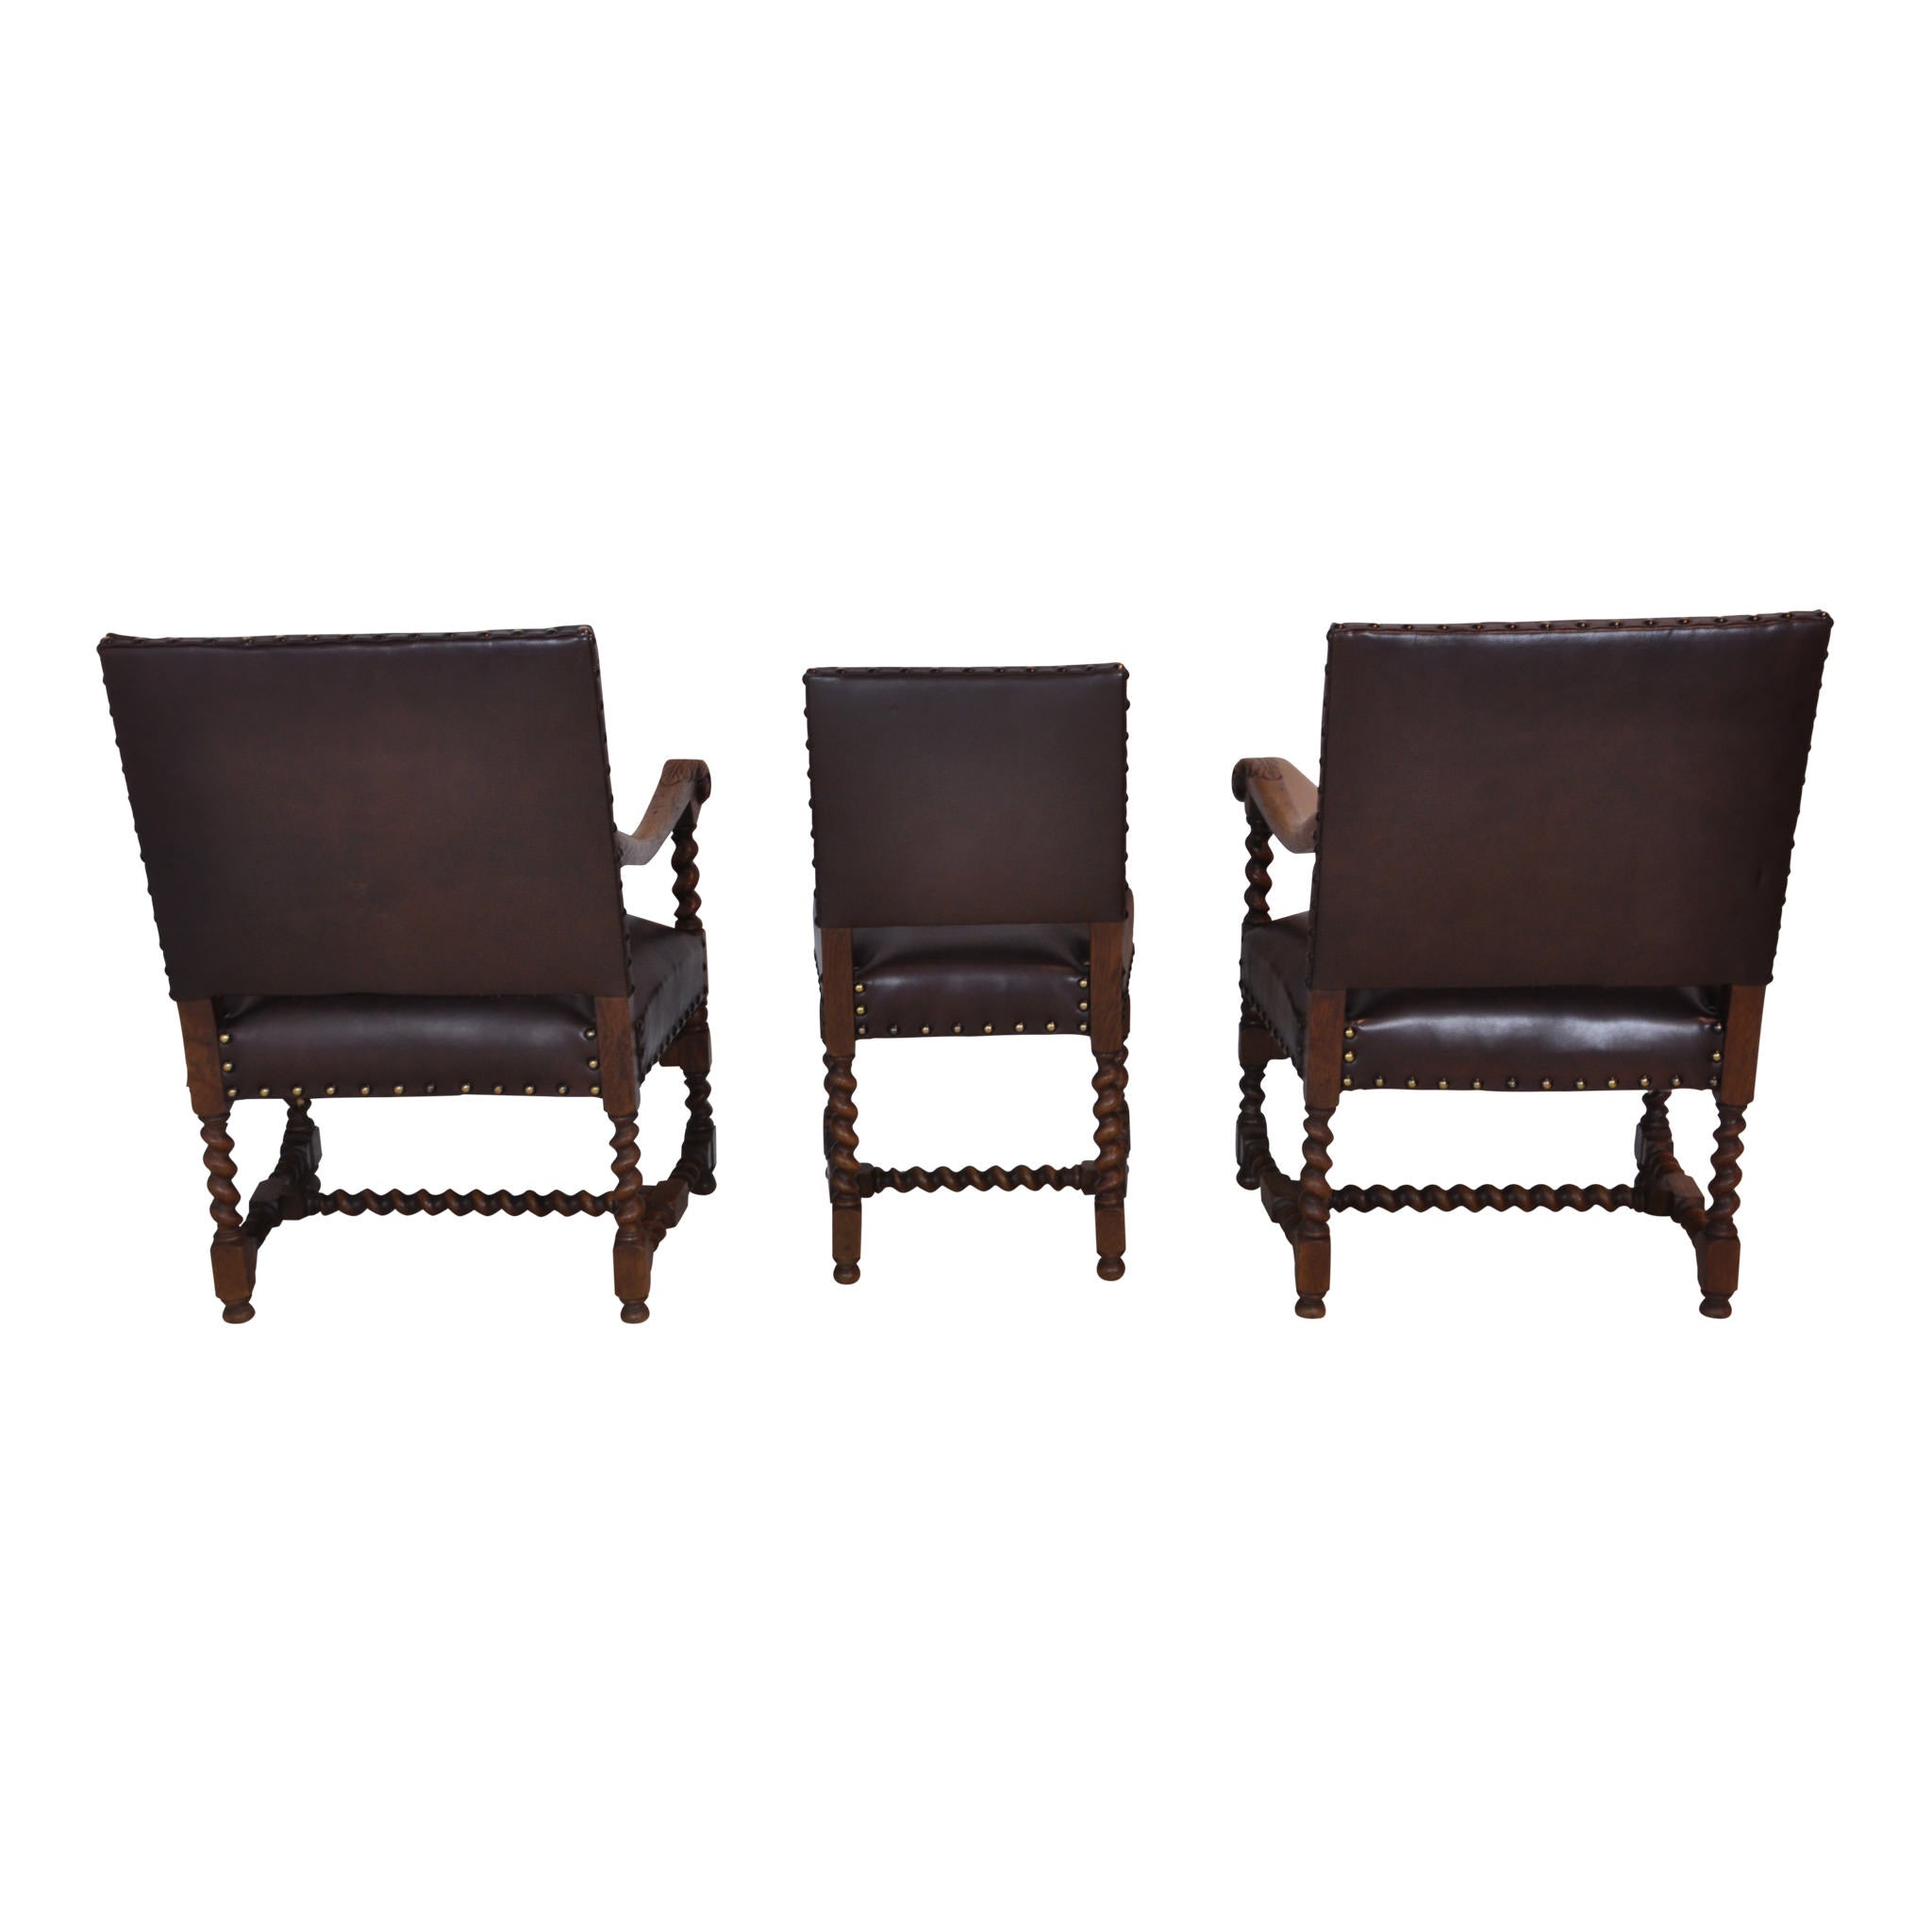 French Twist Chairs Set/6